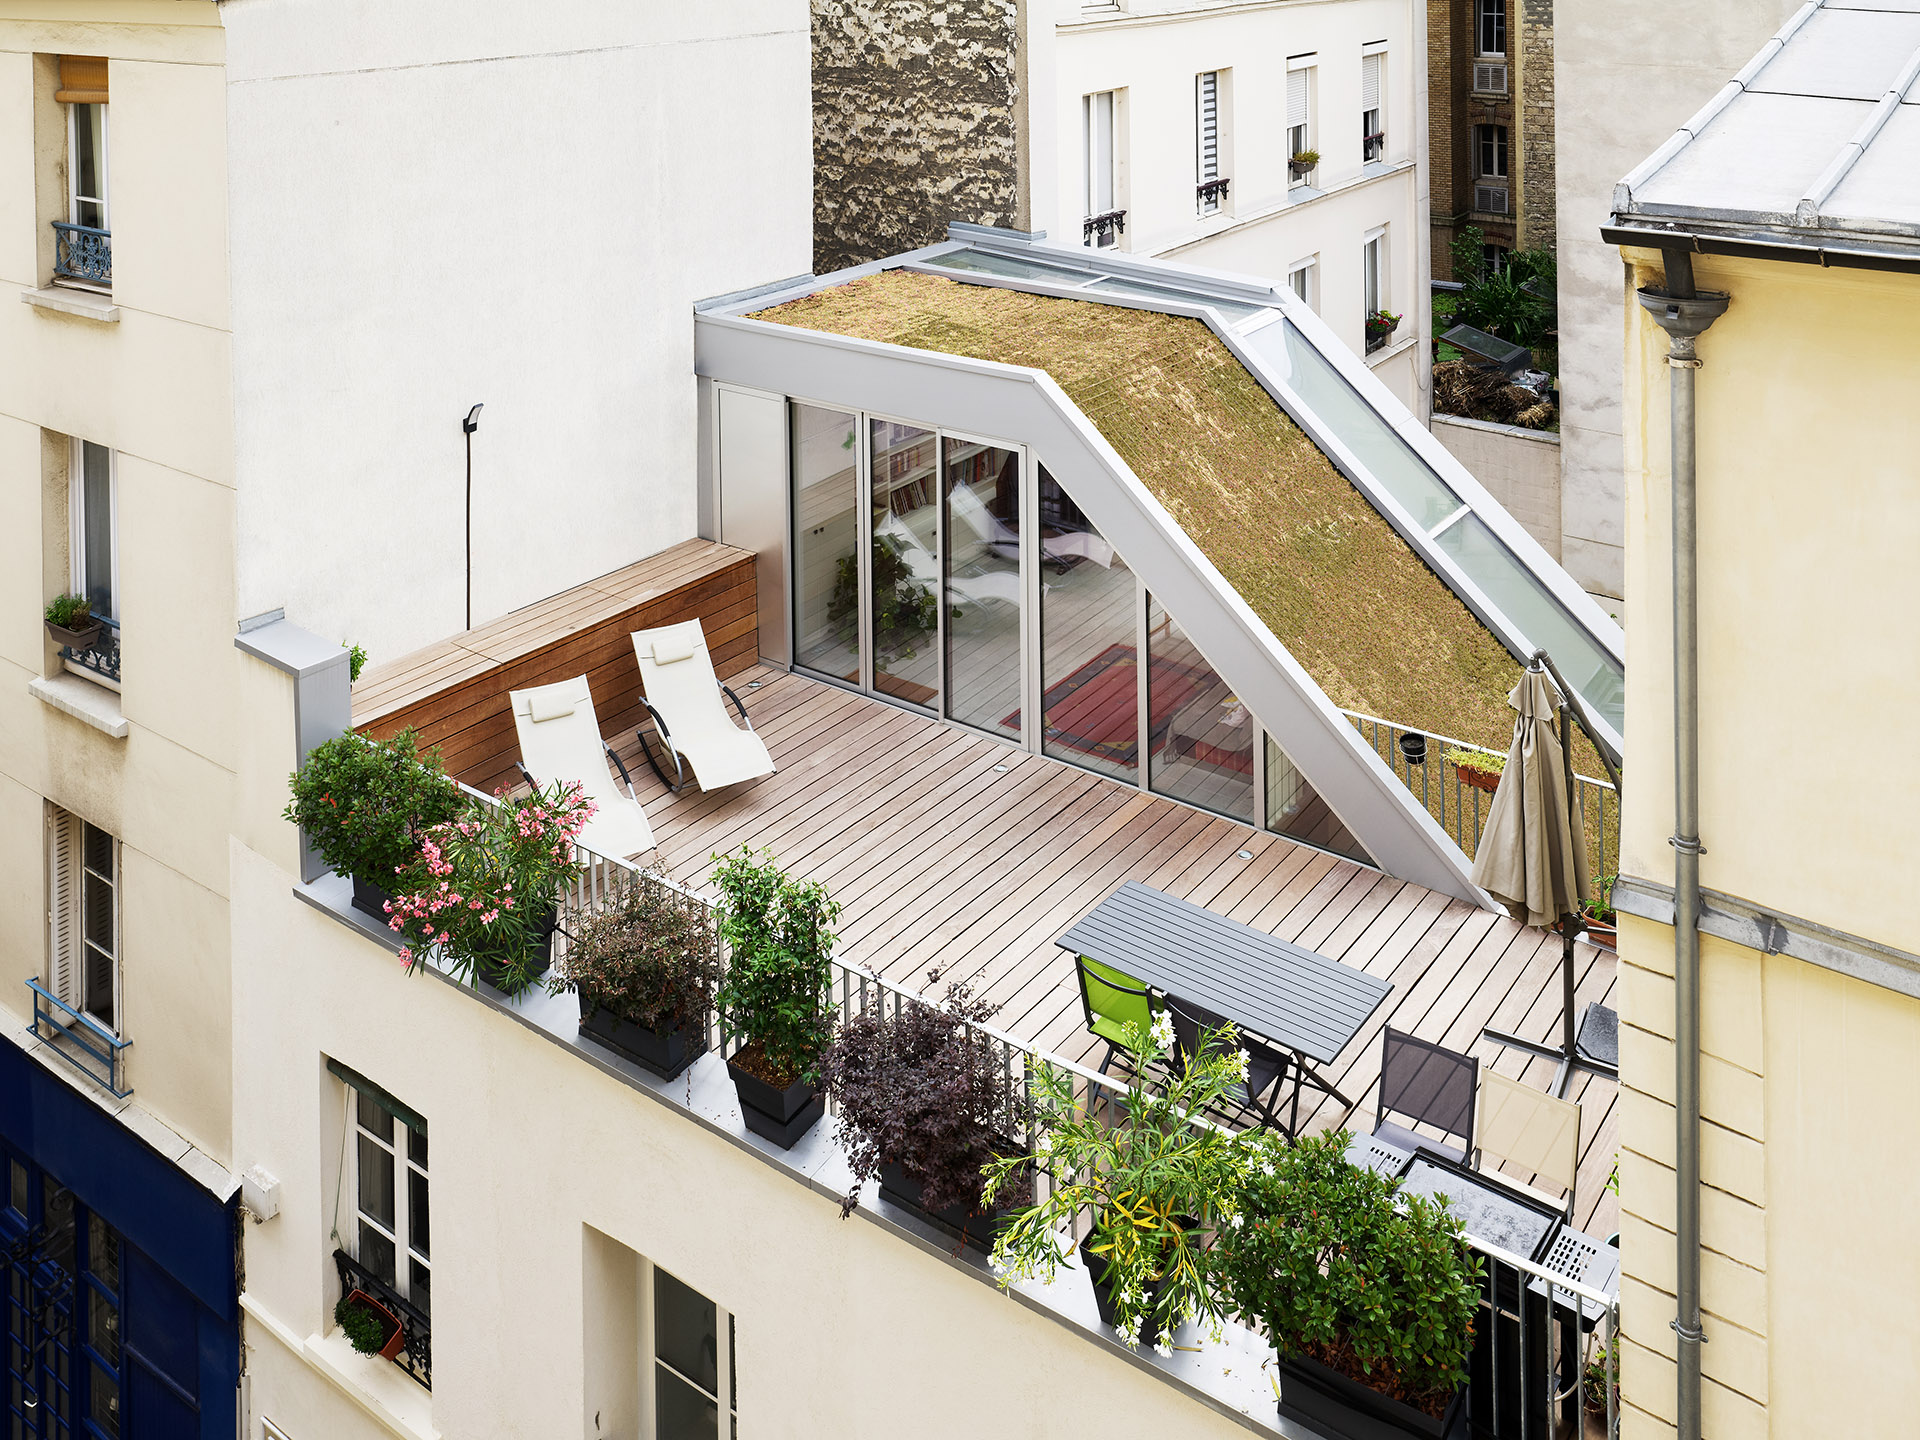 The roof terrace, an exclusive environment to experience the seasons in the heart of France